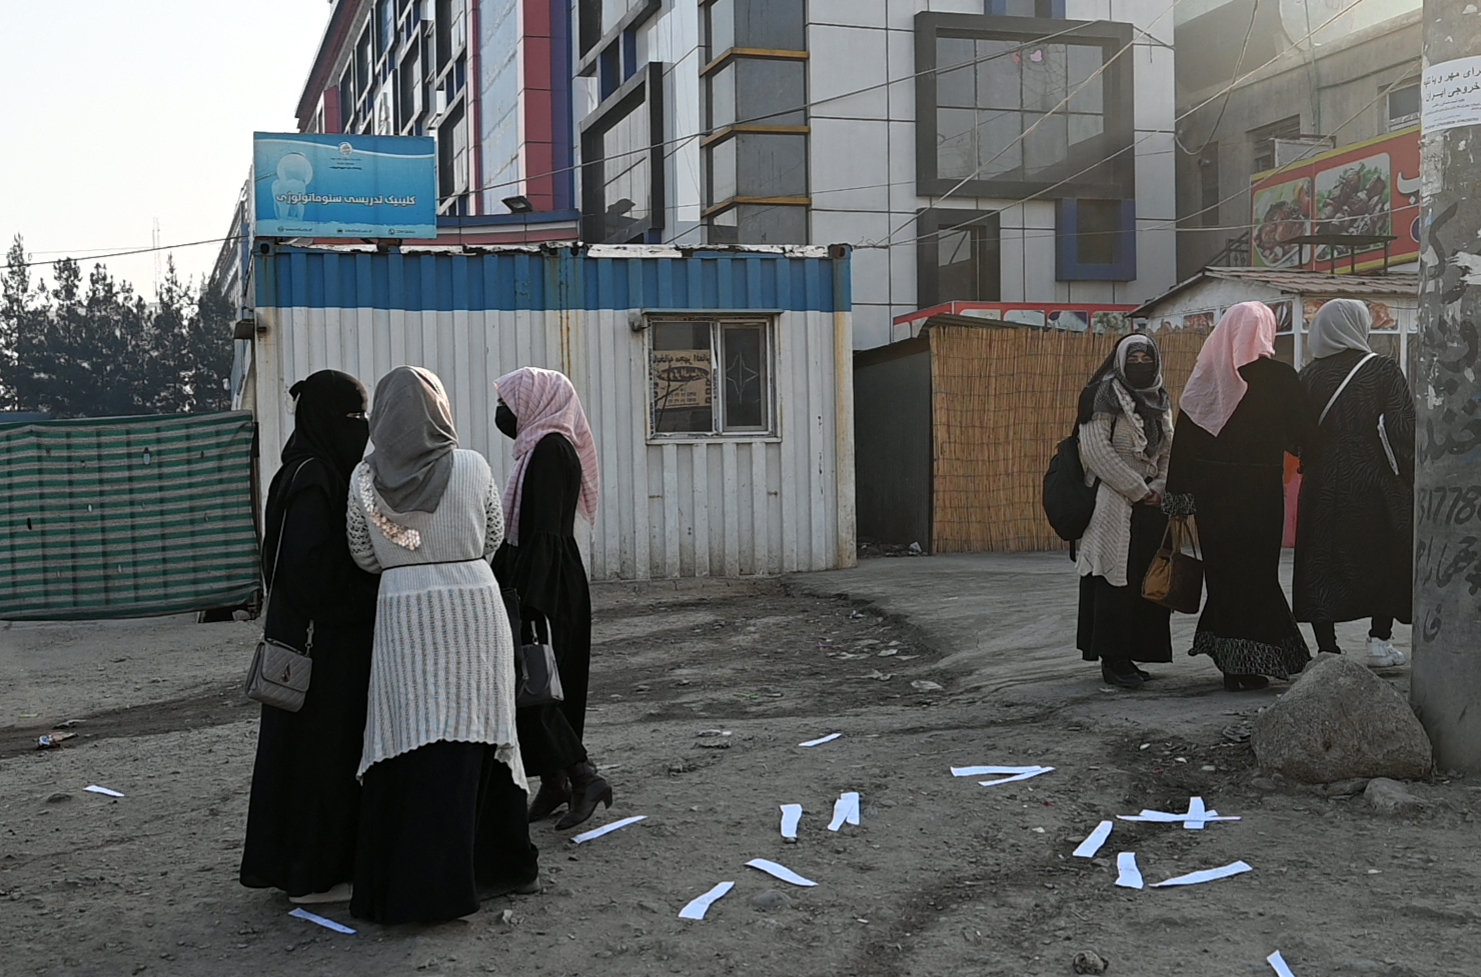 Afghan university students walk home in front of a private university in Kabul on December 21, 2022. (Wakil KOHSAR / AFP)